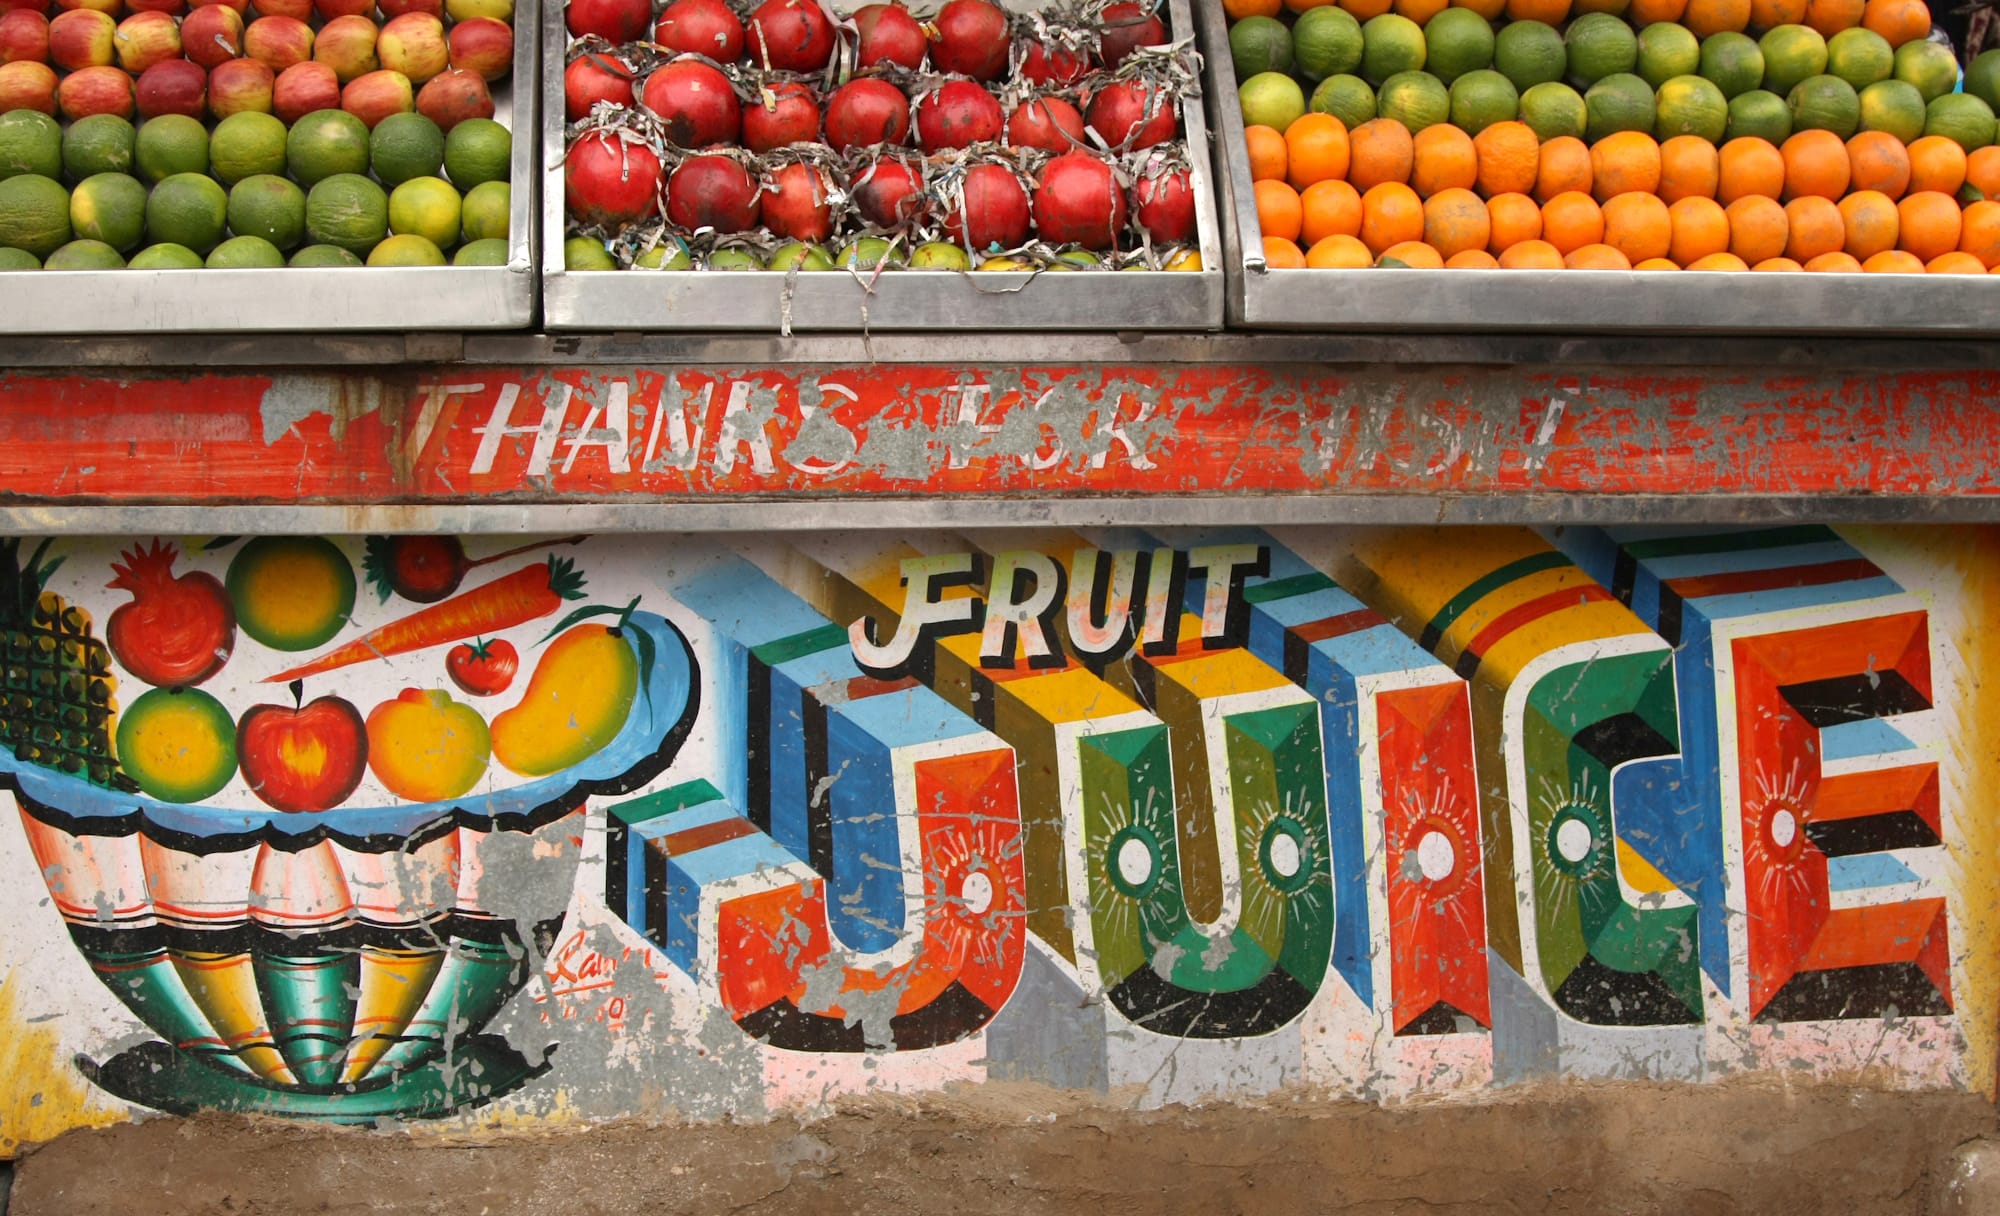 Fruits on display in trays with their colours mirrored below by a flamboyant painted sign that says "fruit juice" next to a picture of a full fruit bowl.